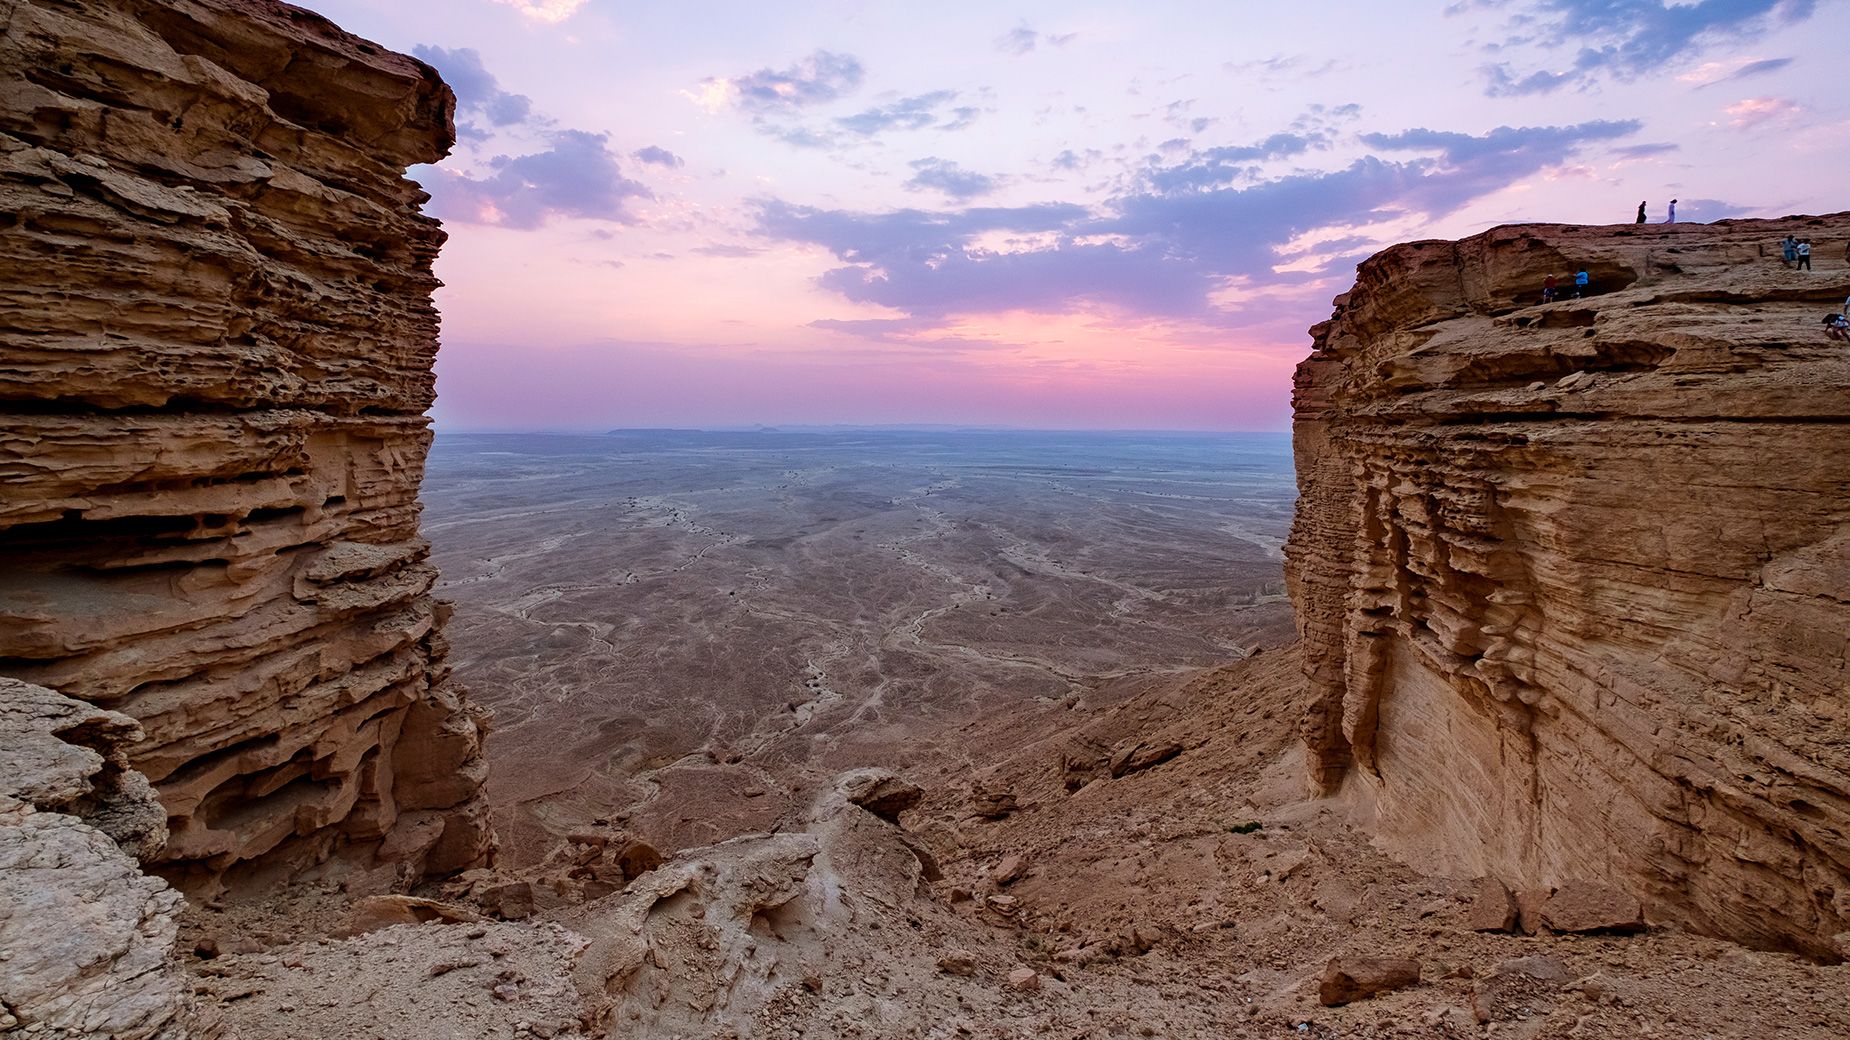 This spectacular viewpoint in the Tuwaiq Mountains is known as the “Edge of the World.”